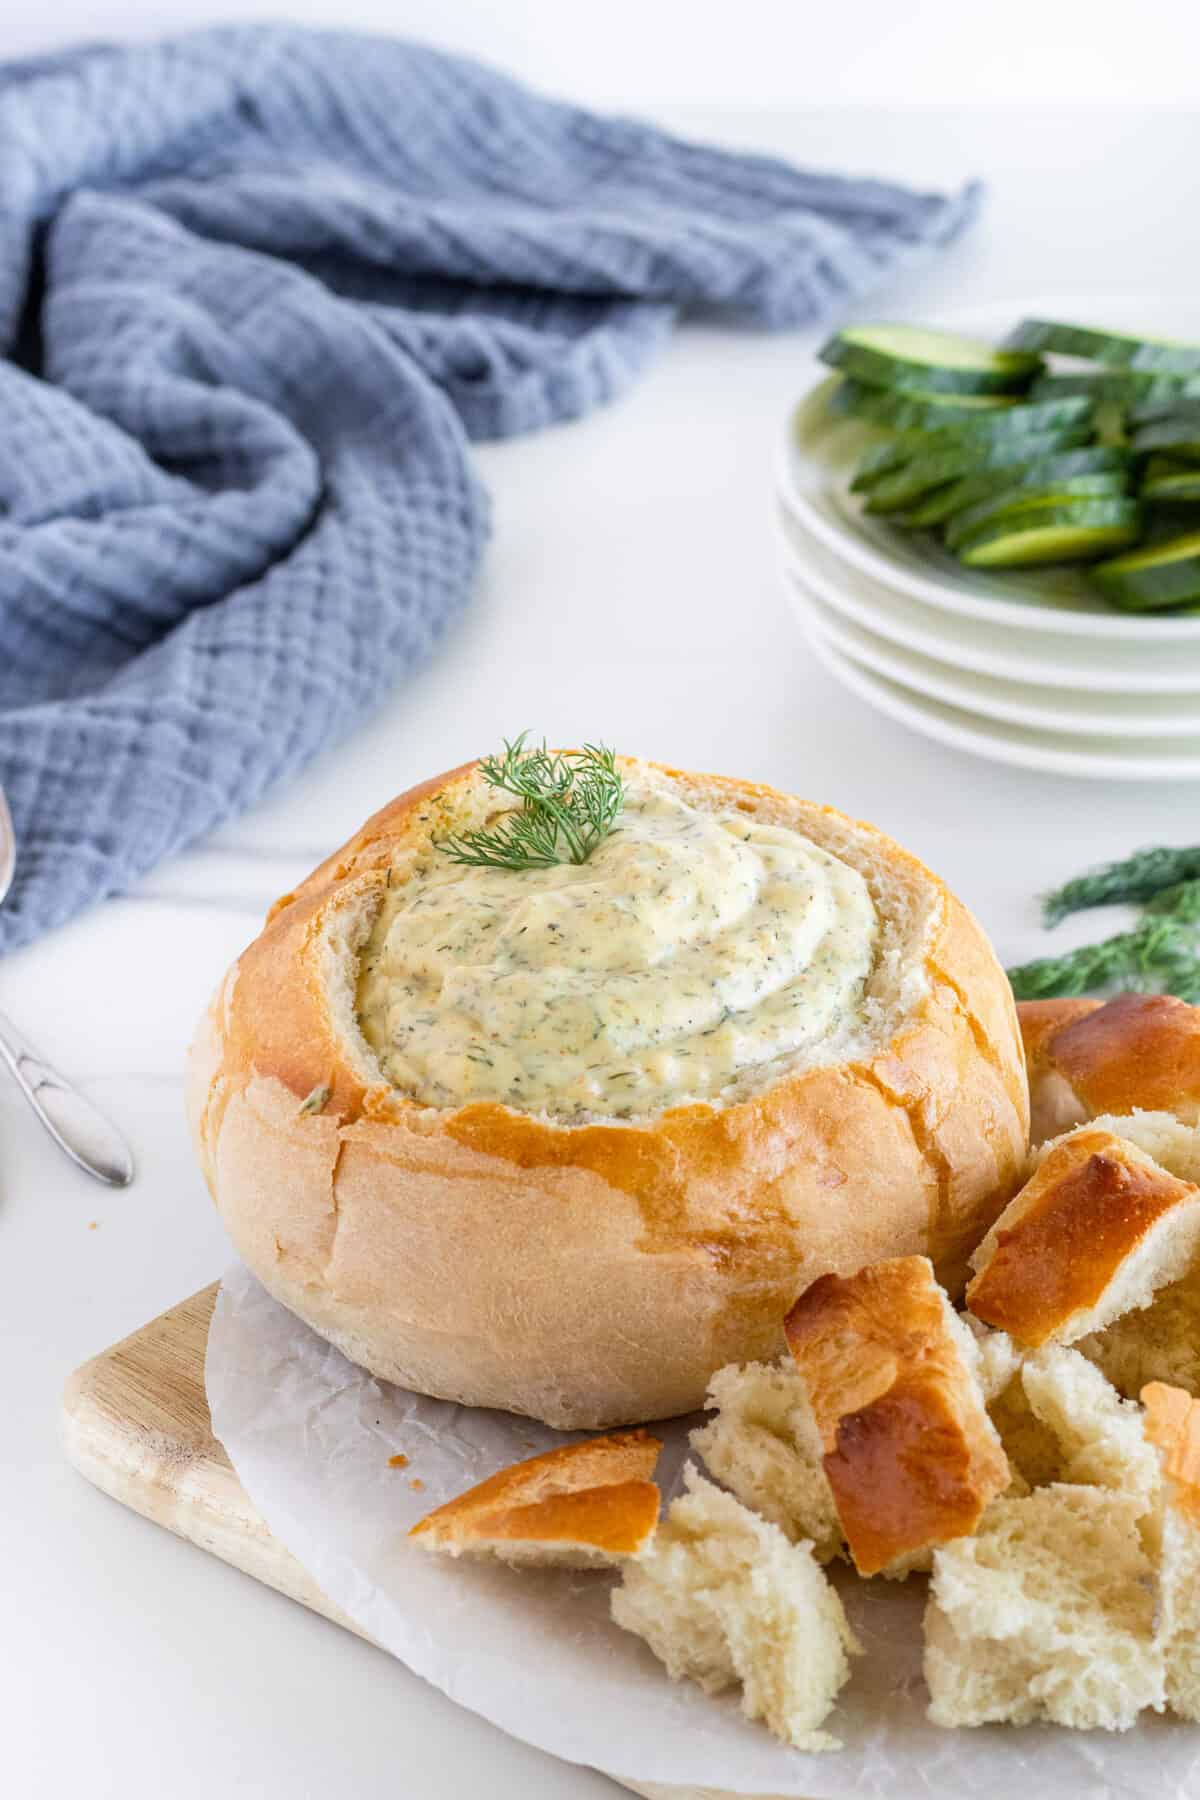 dill dip in a bread bowl with bread cubes and cucumbers 